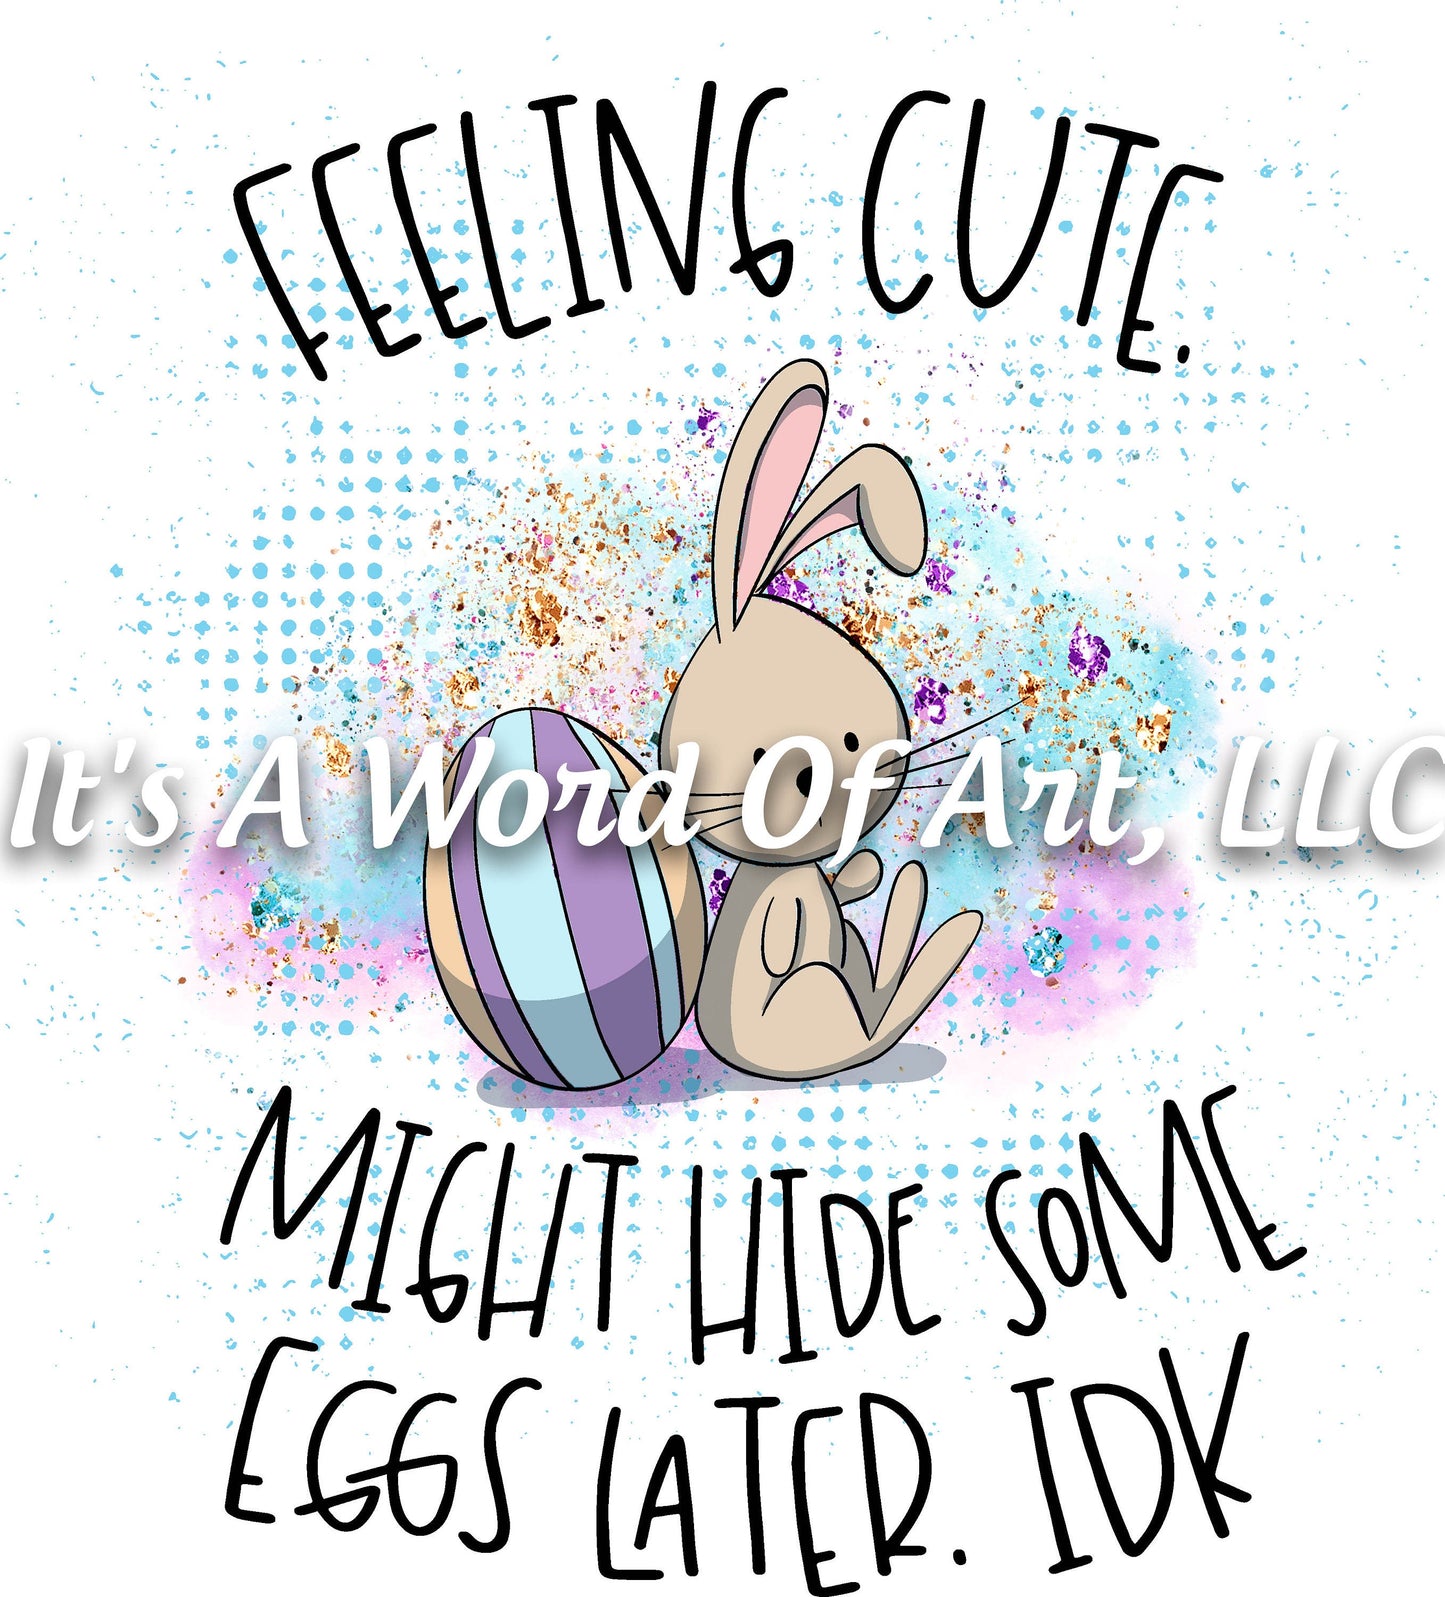 Easter 1 - Feelin Cute Might Hide Some Eggs Later - Sublimation Transfer Set/Ready To Press Sublimation Transfer/Sublimation Transfer